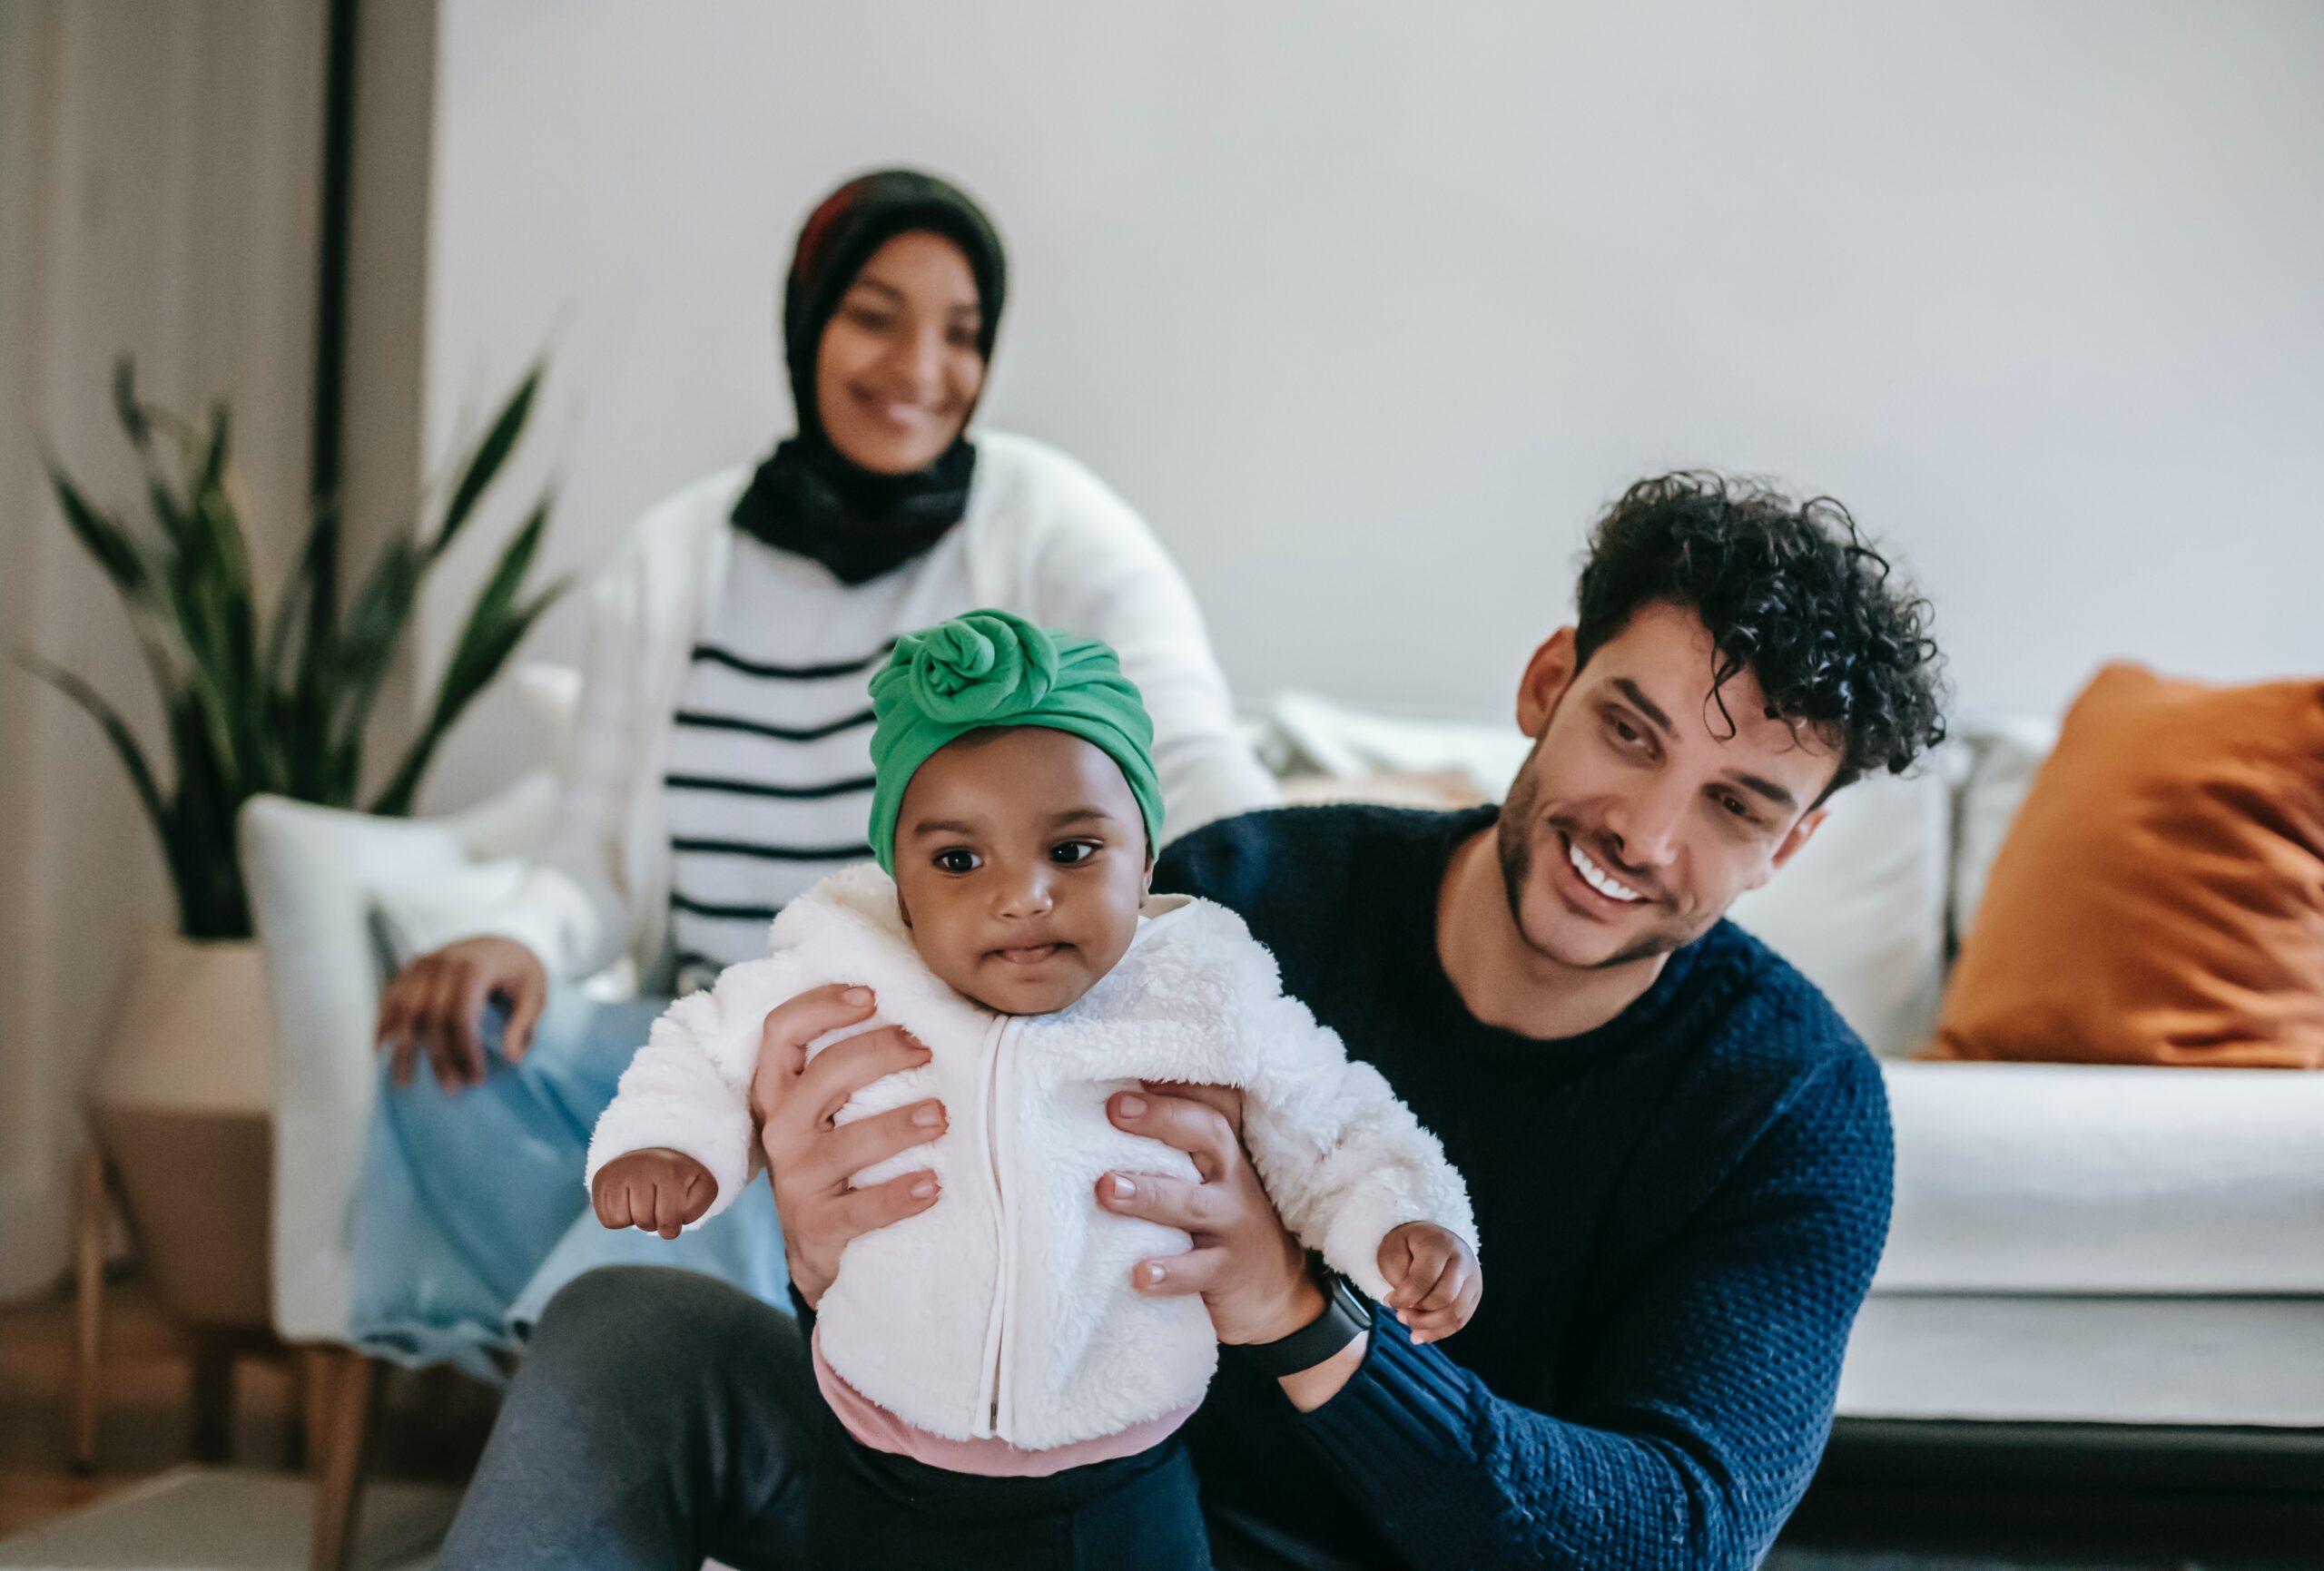 Ethnically diverse family with baby